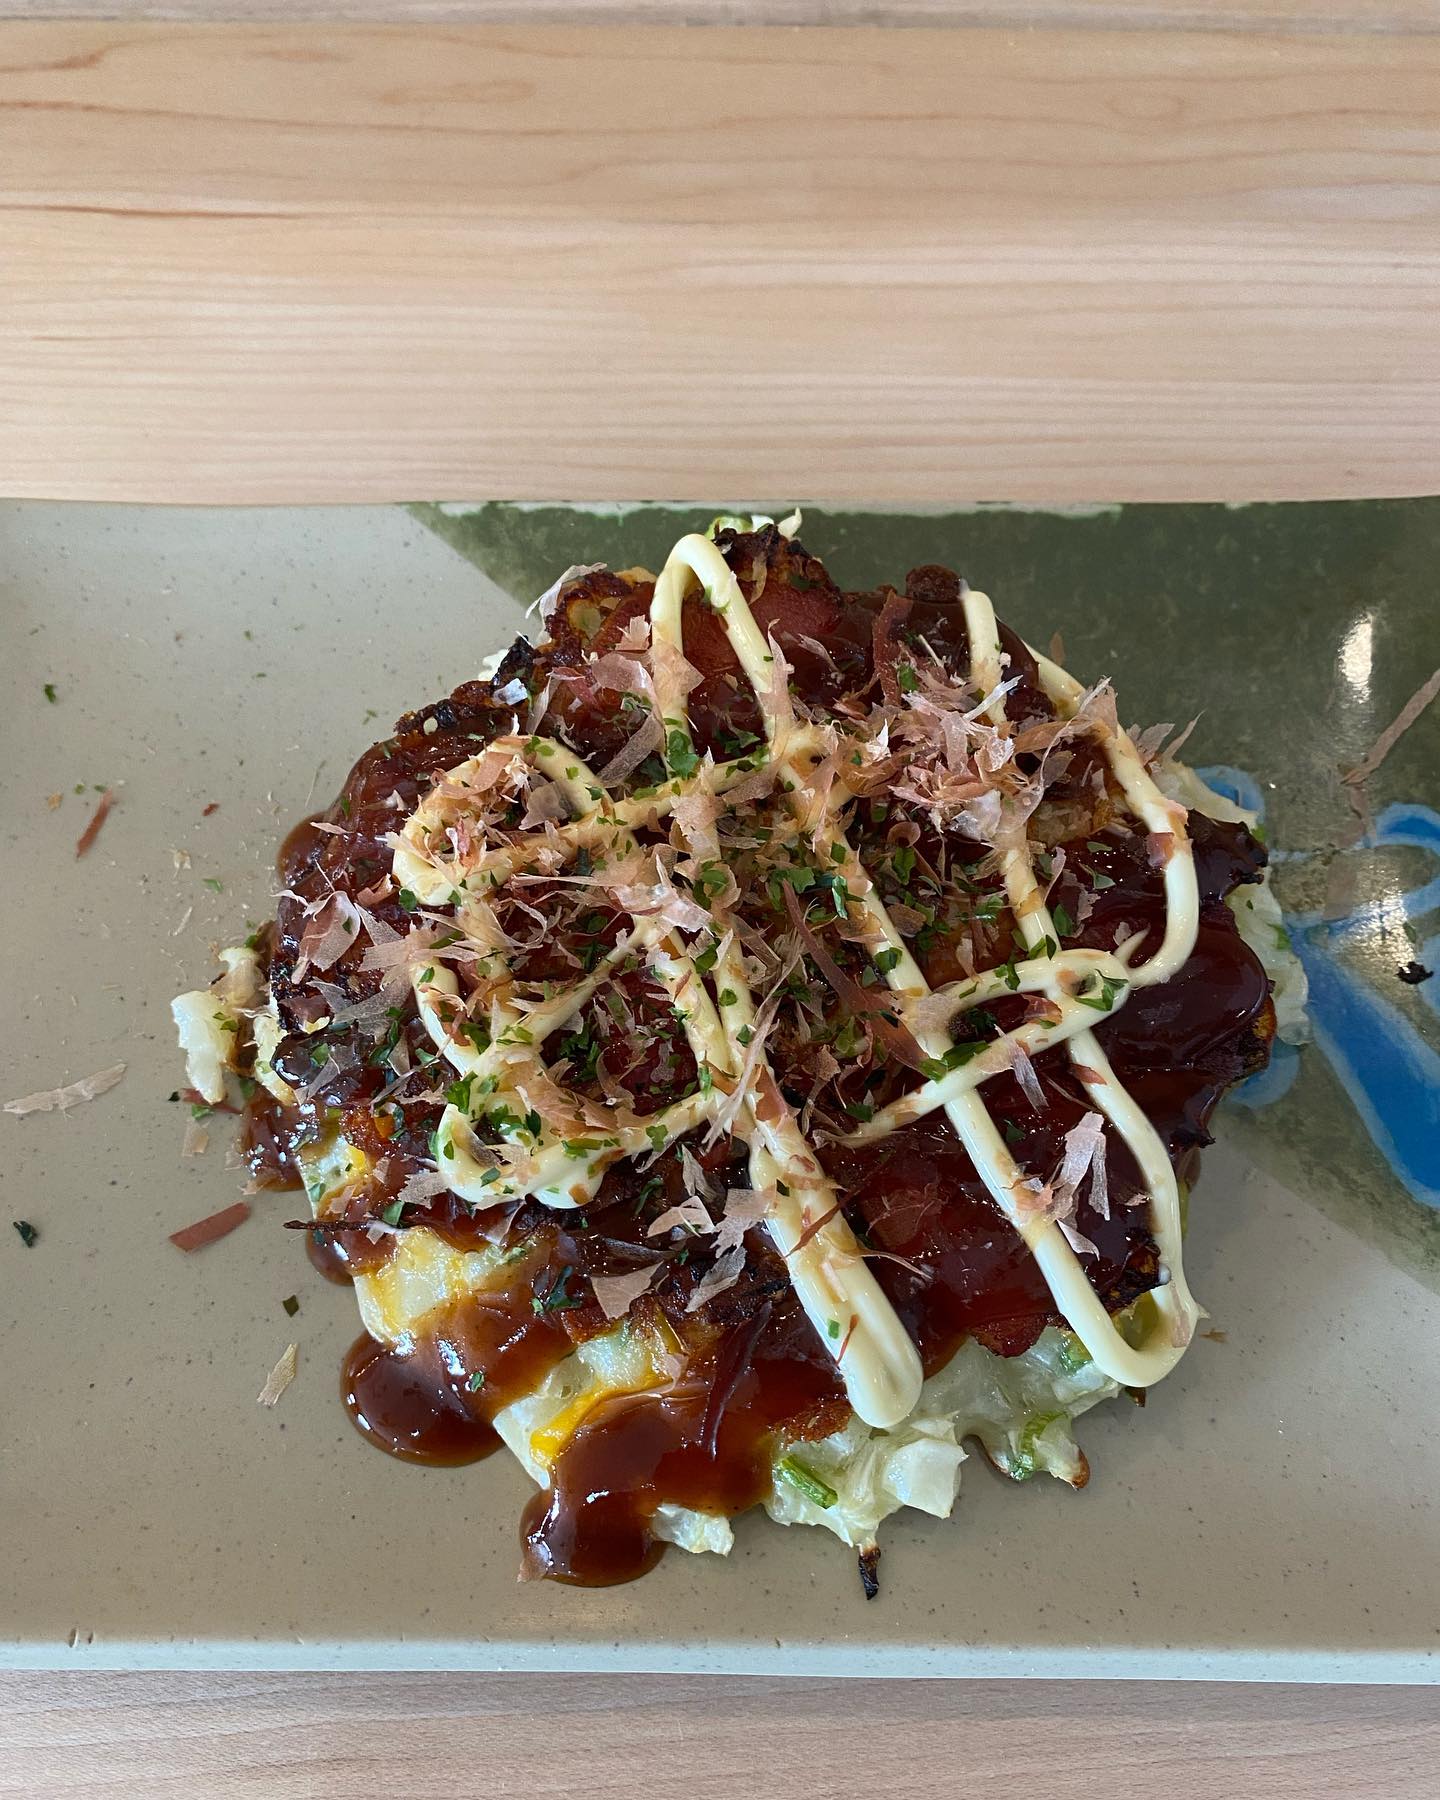 On a metal plate, there is a special dish from the new restaurant ISHI in Champaign. The dish is topped with lines of sauce and little microgreens. Photo by Ken Ishibashi.